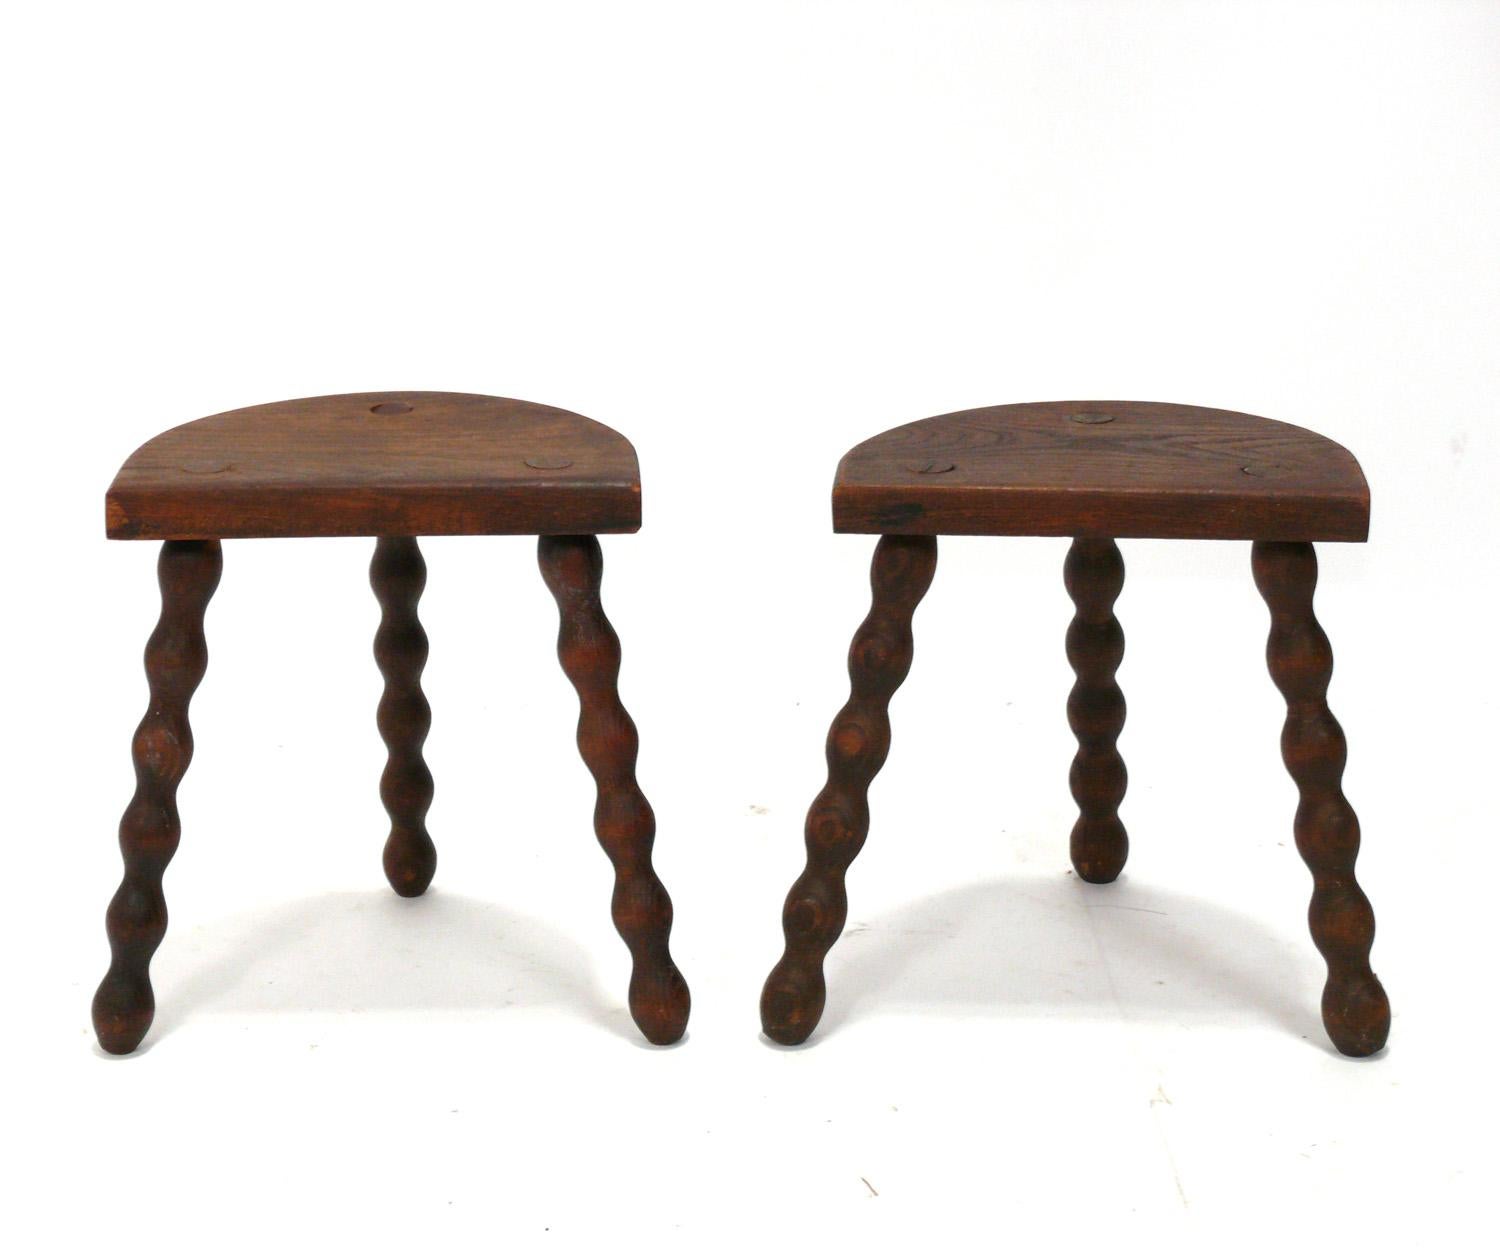 Rustic French Farmhouse Stools For Sale